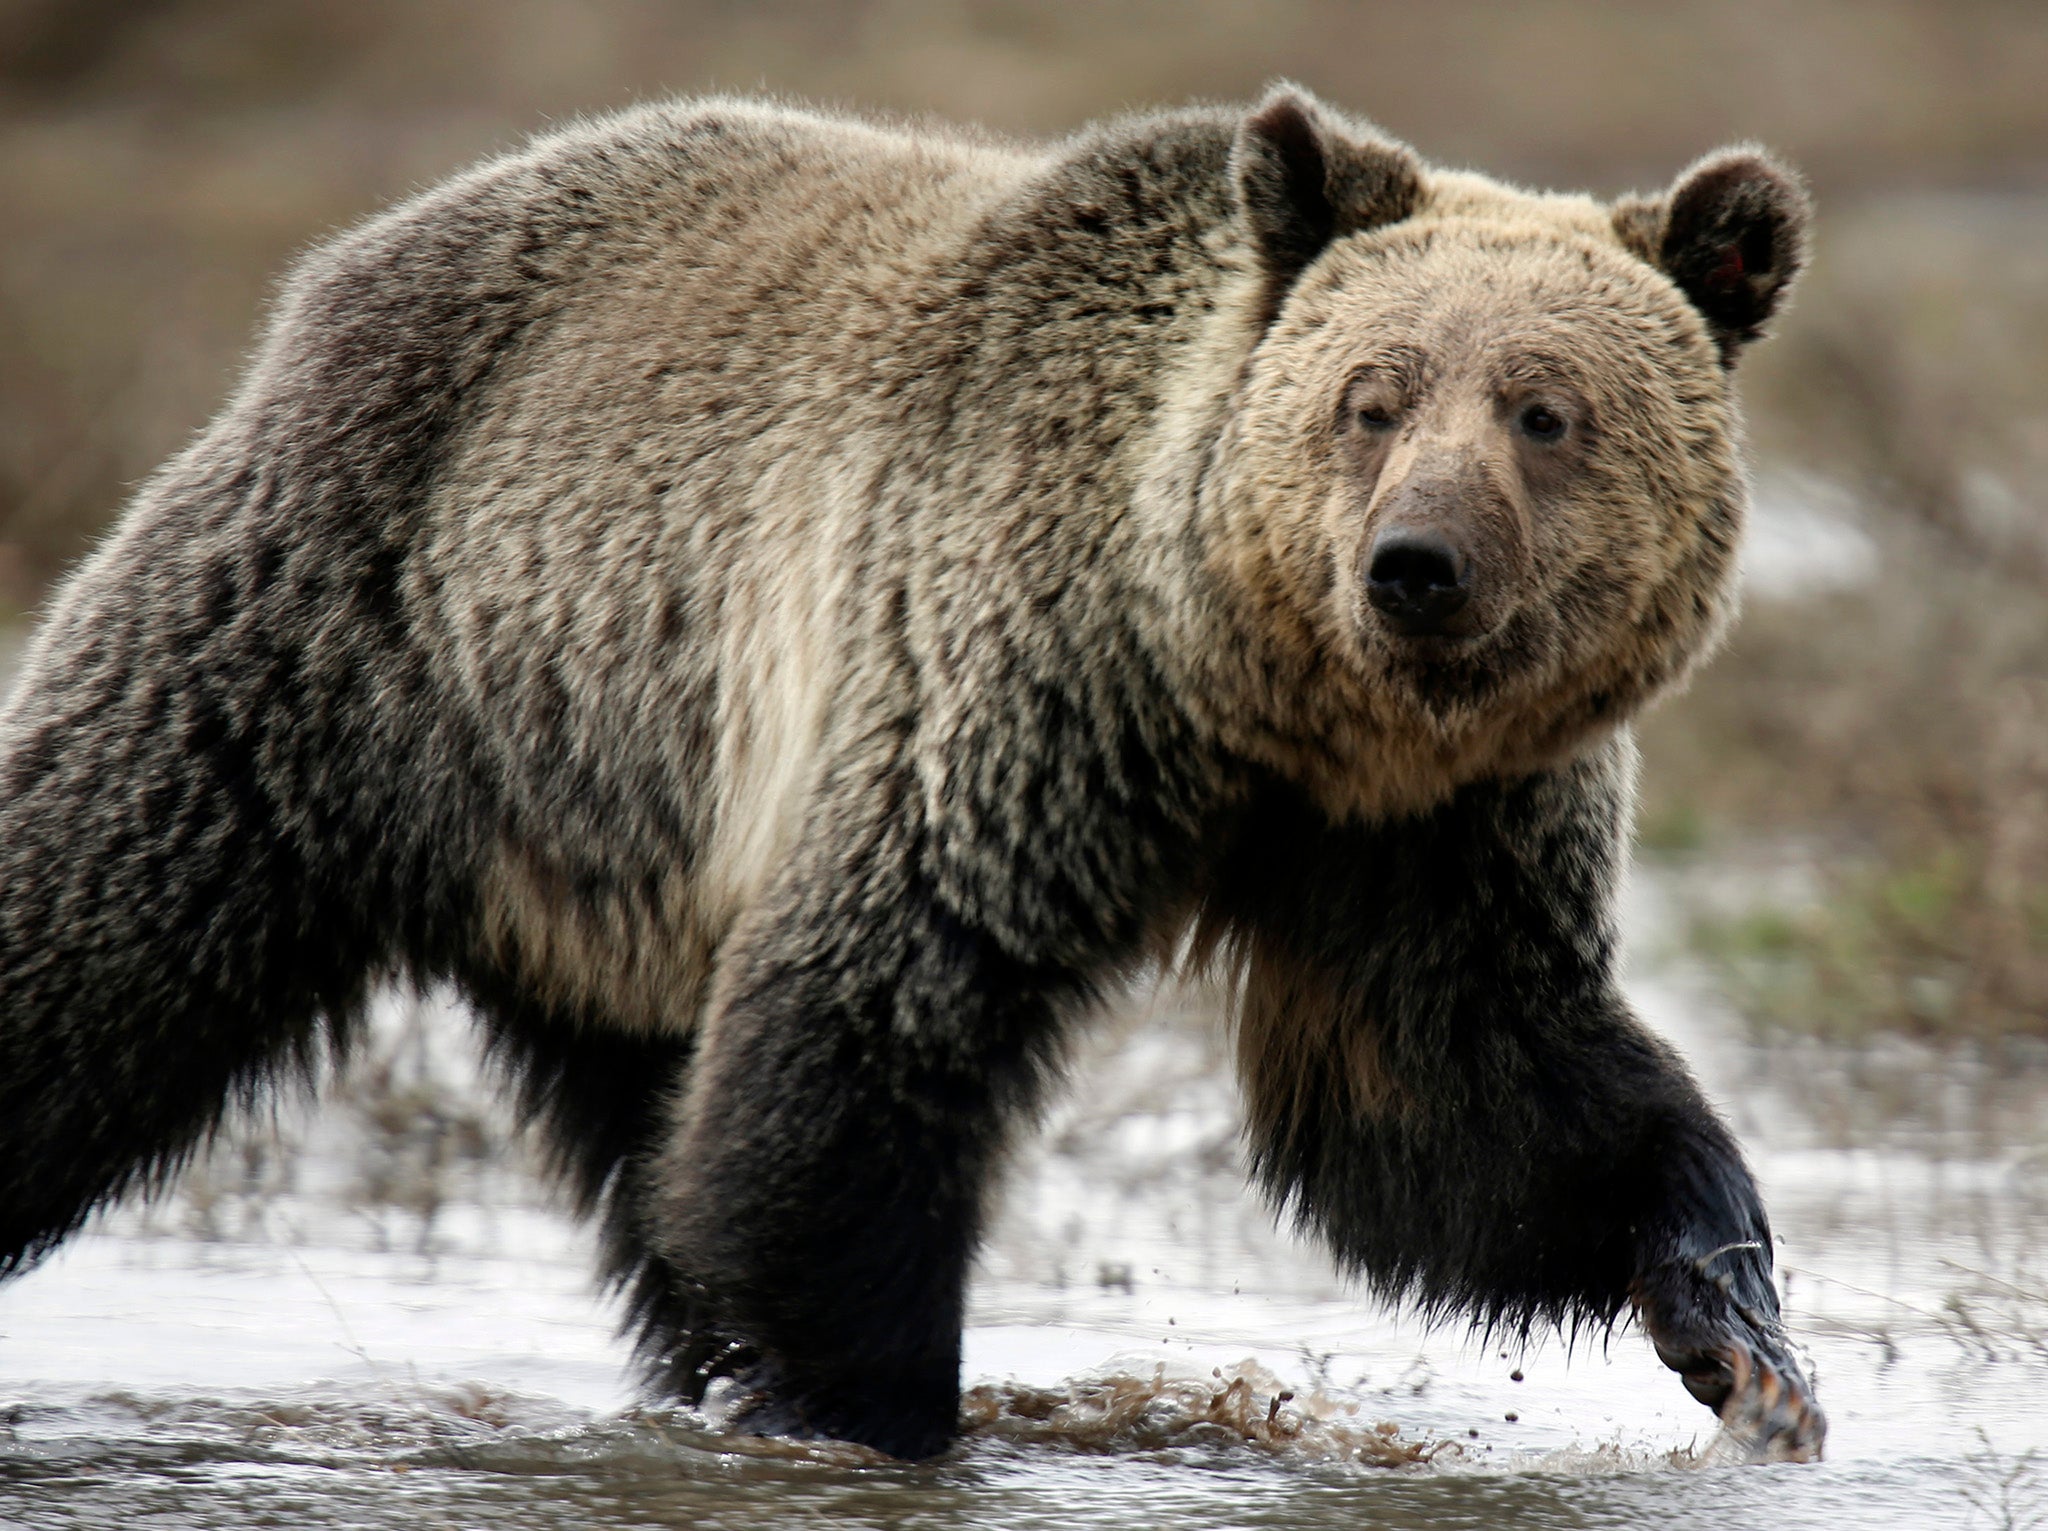 The subadult grizzly bear will be killed for its 'general interest' in humans